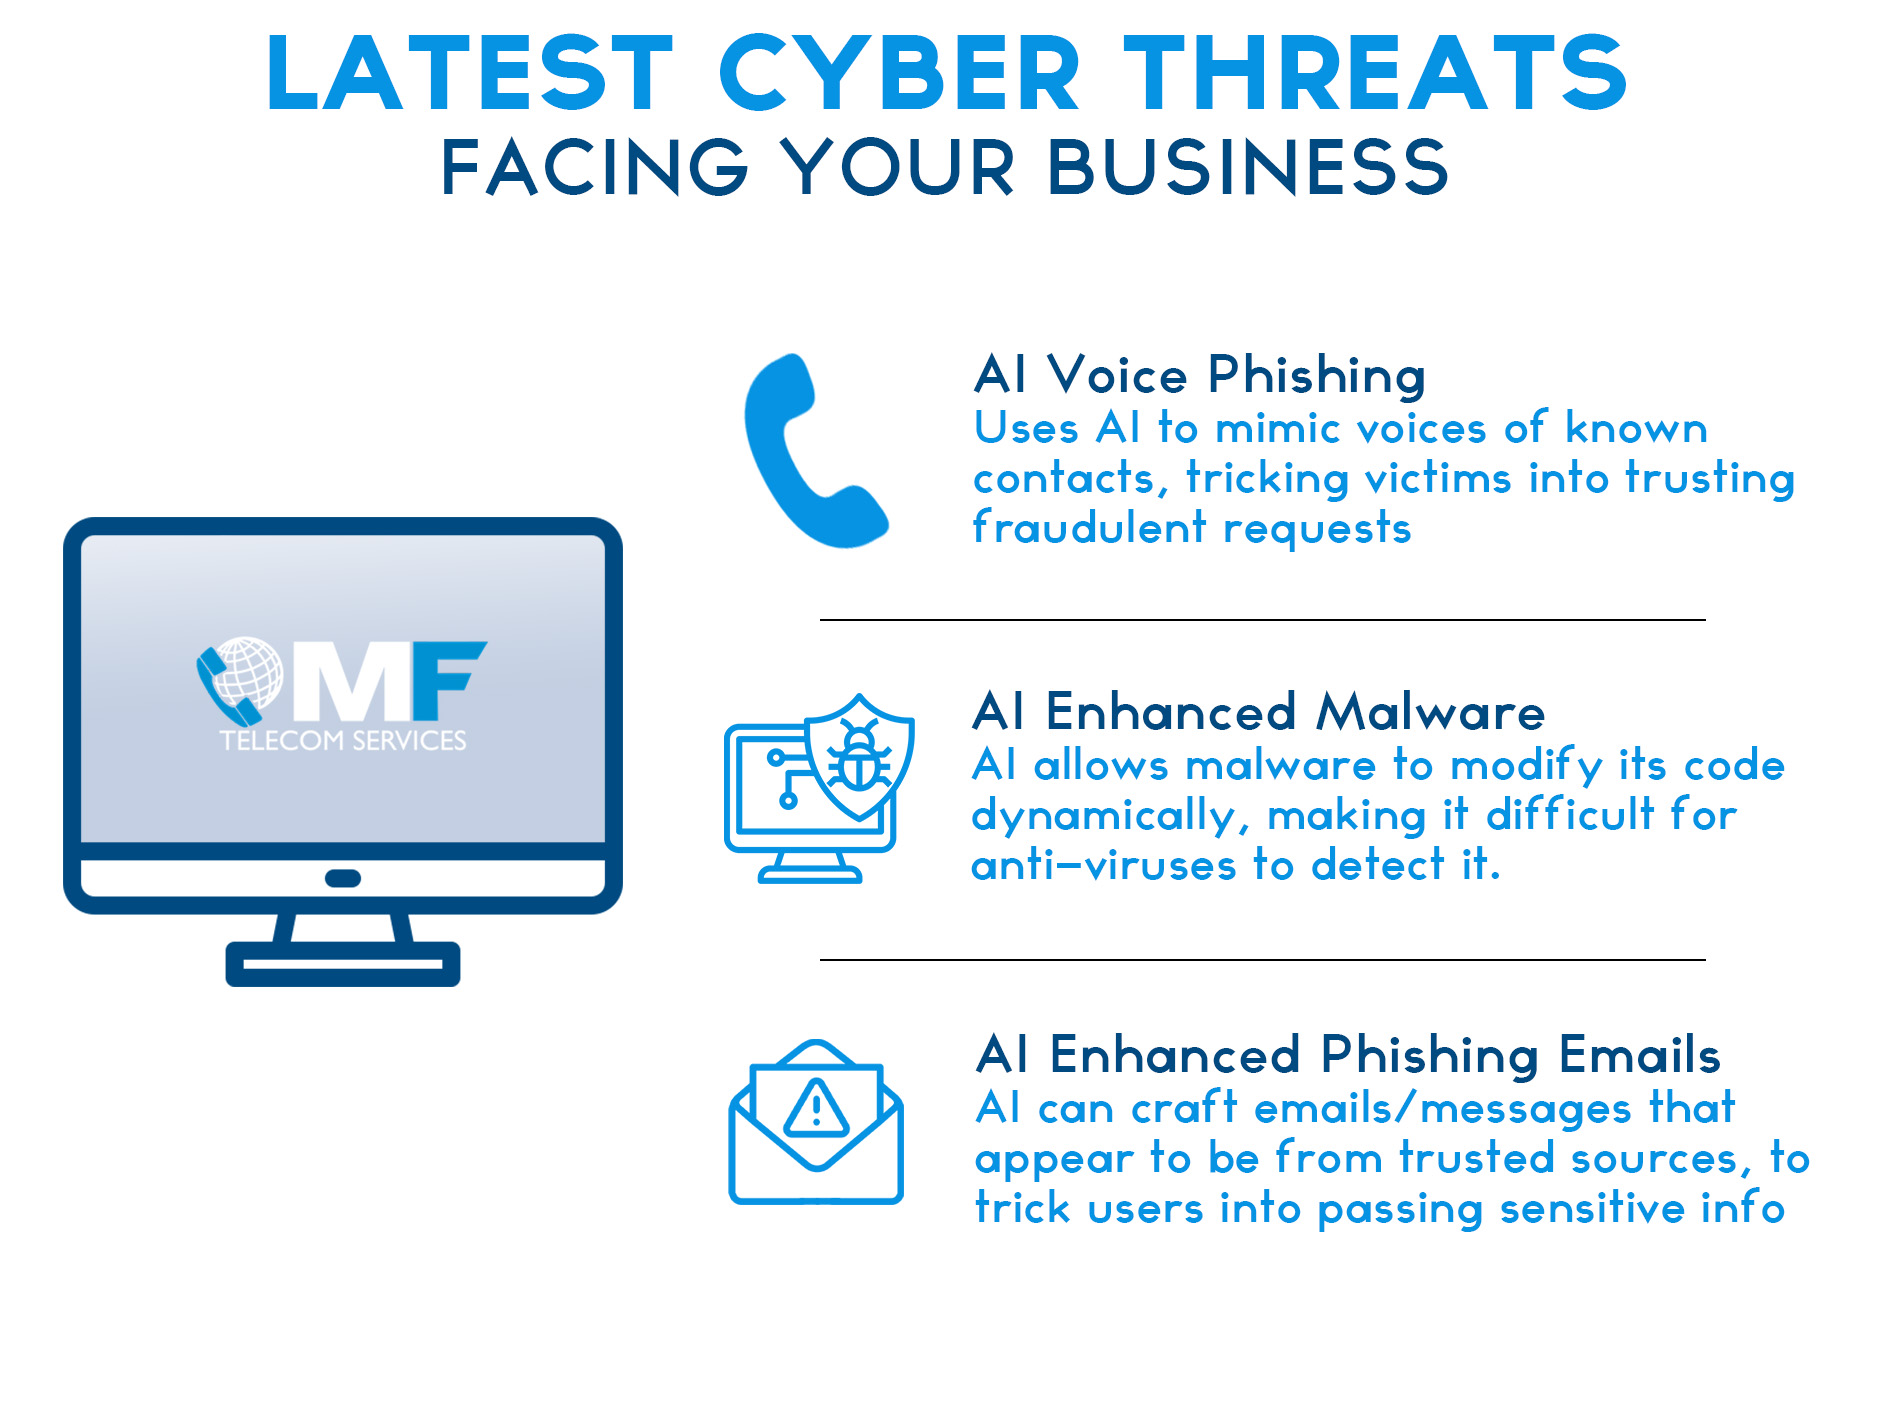 Latest AI Cyber Threats infographic